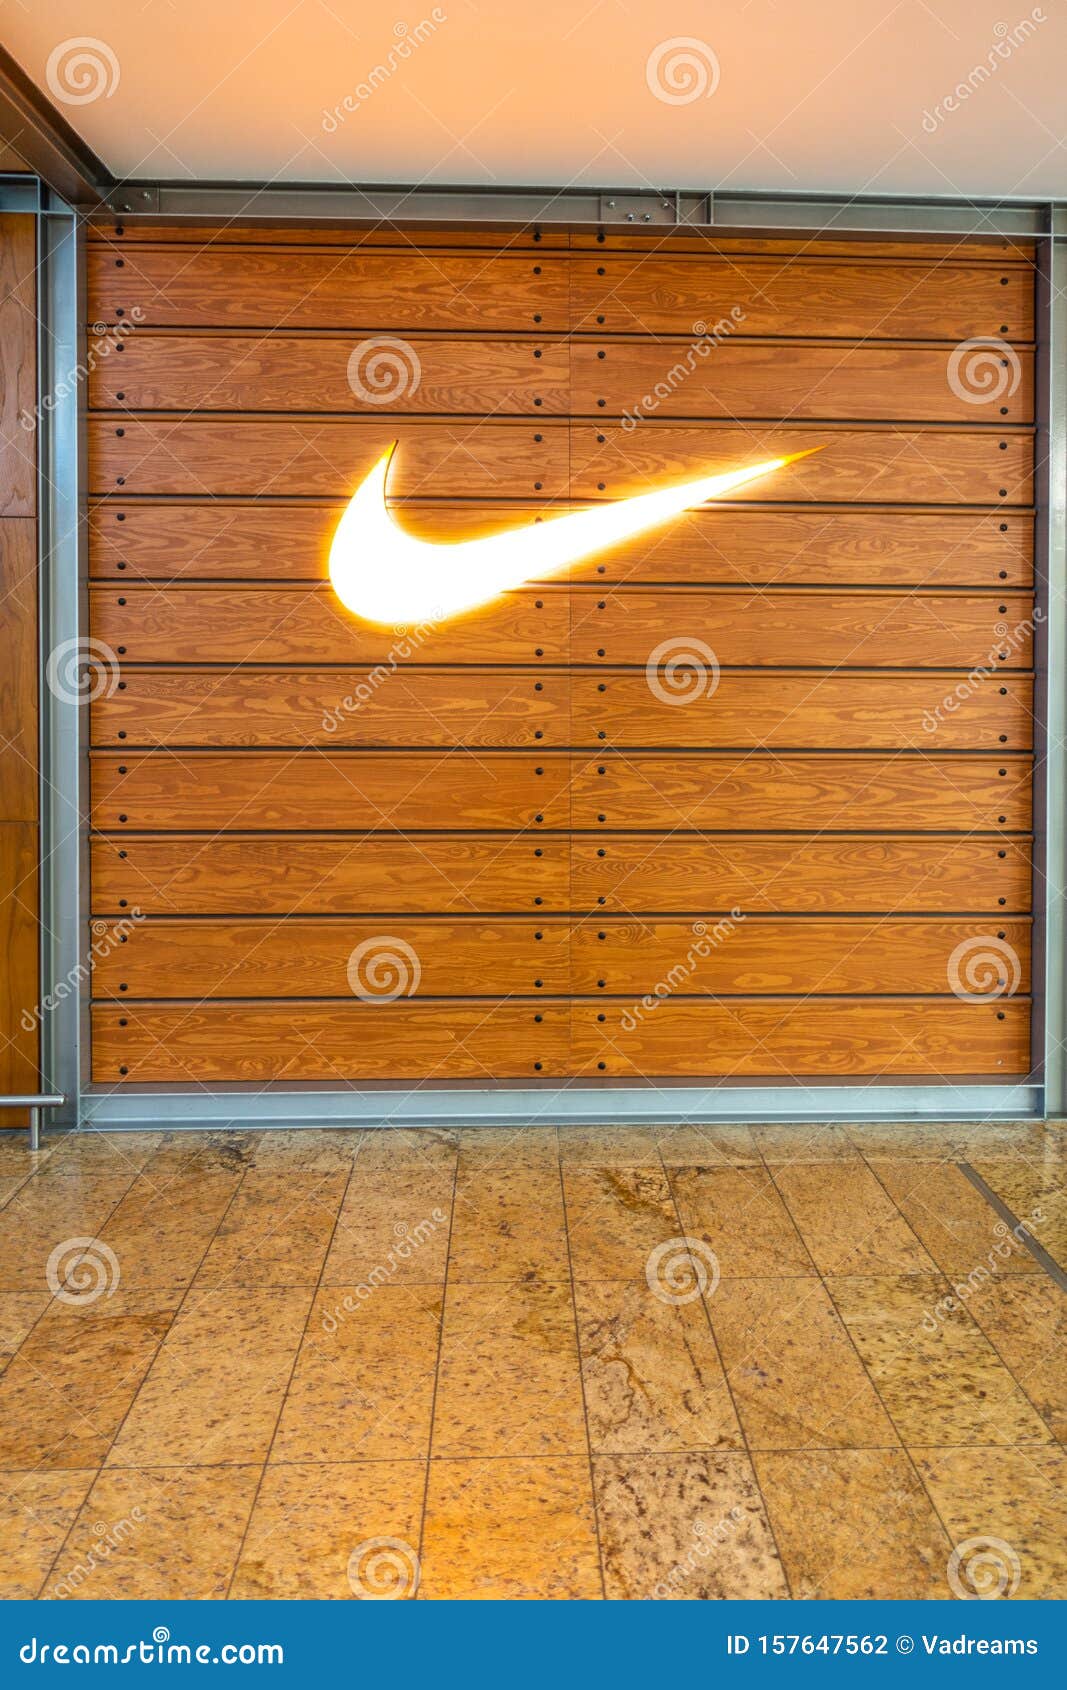 nike stores all over the world